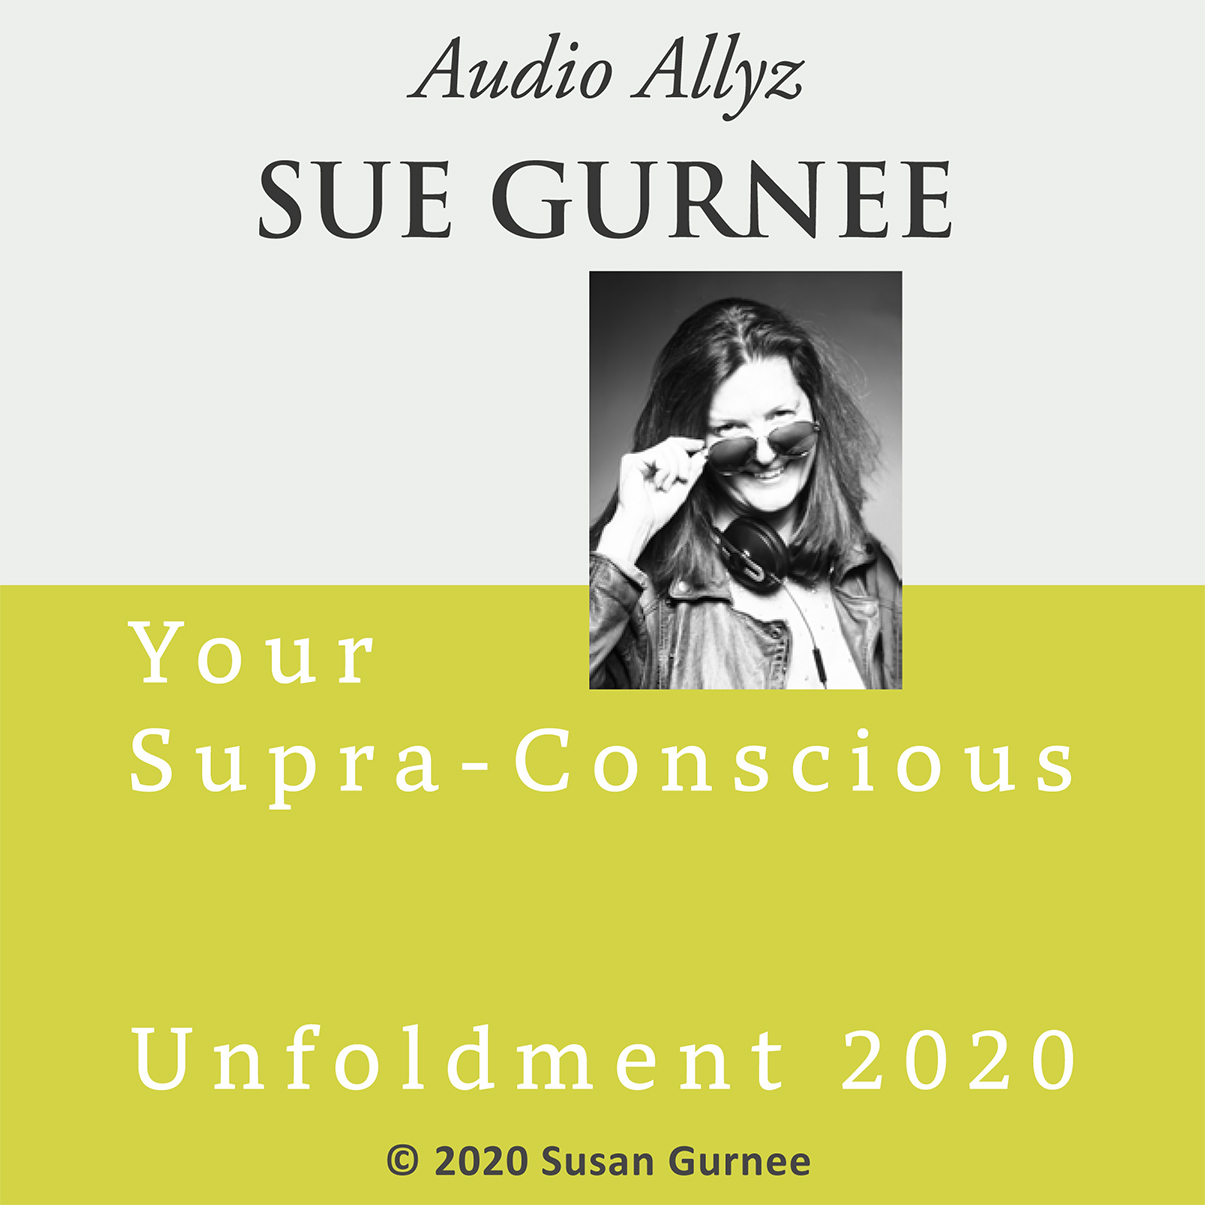 Click here for Unfoldment 2020 - Your Supra-Conscious